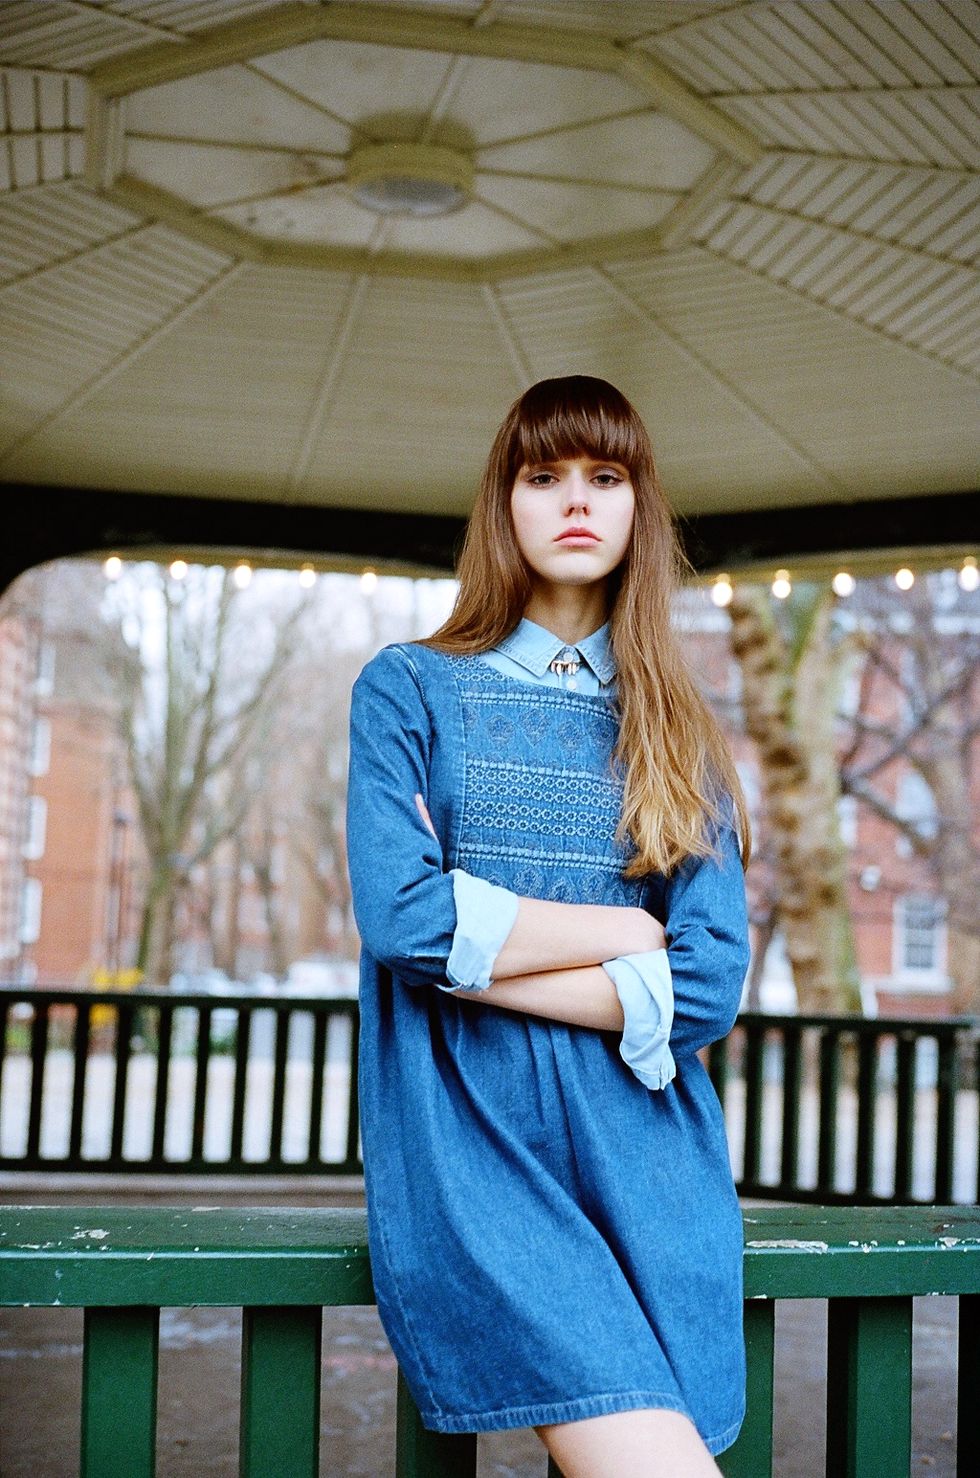 How to wear double denim: layer a shirt under your dress